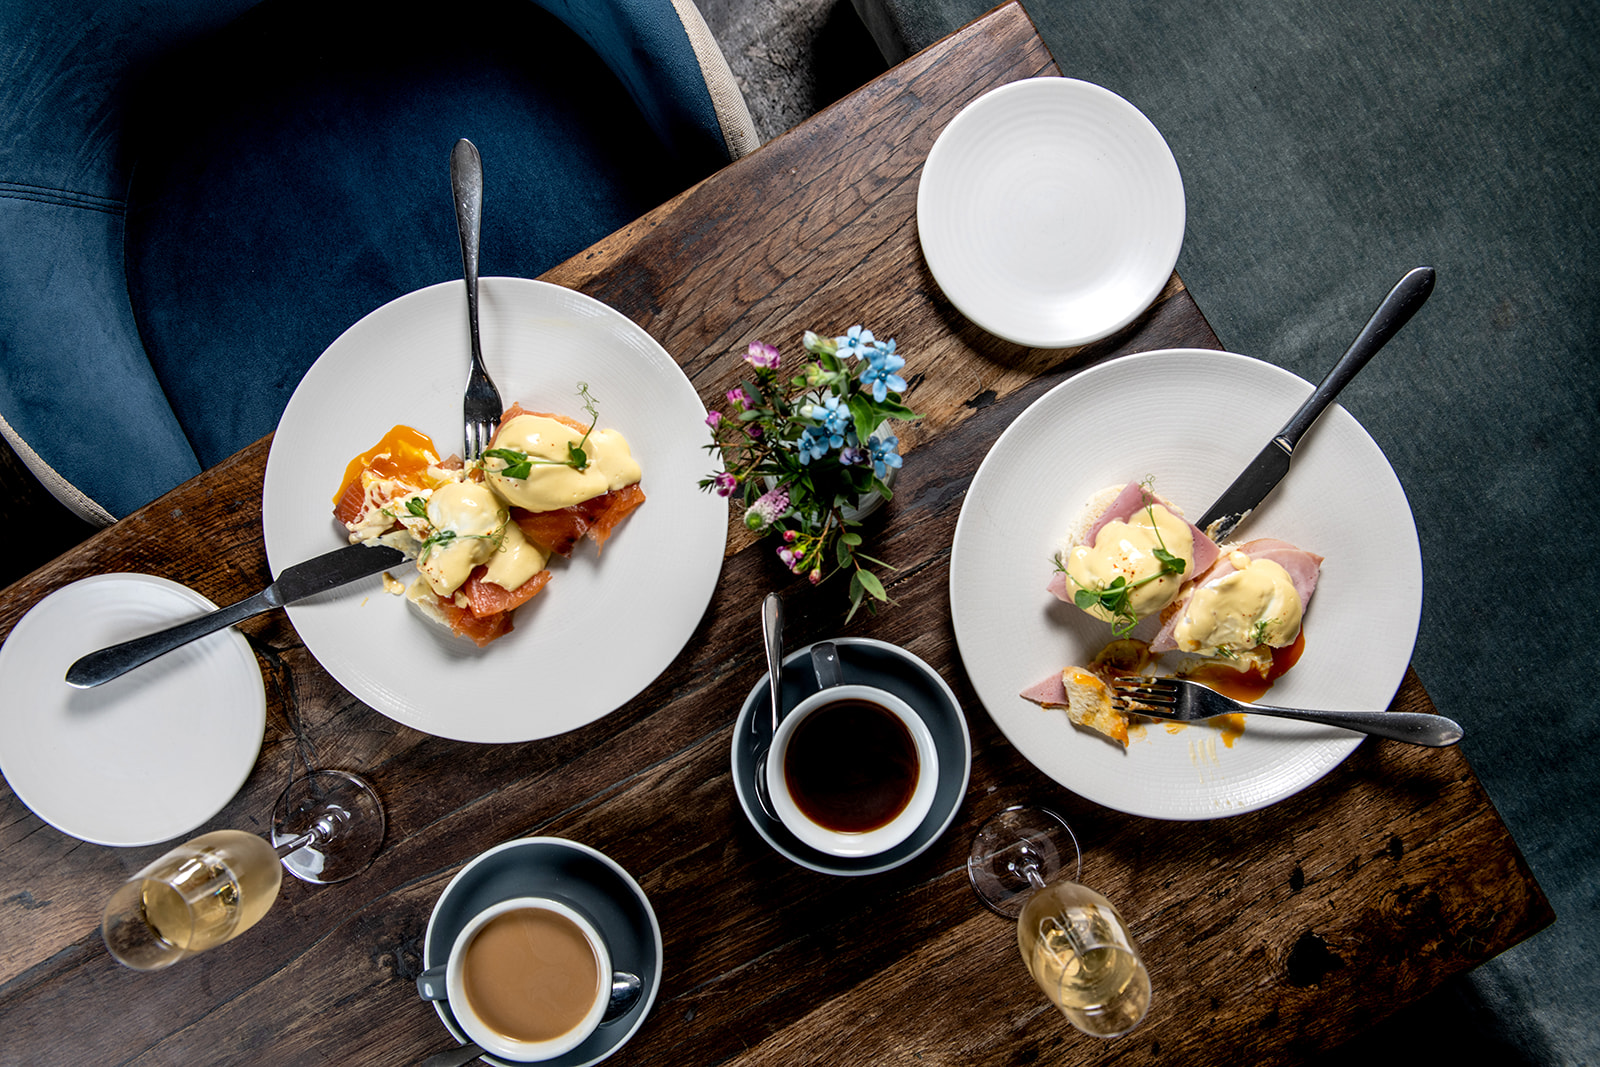 Weekend brunch in the Swan bar by the River Thames